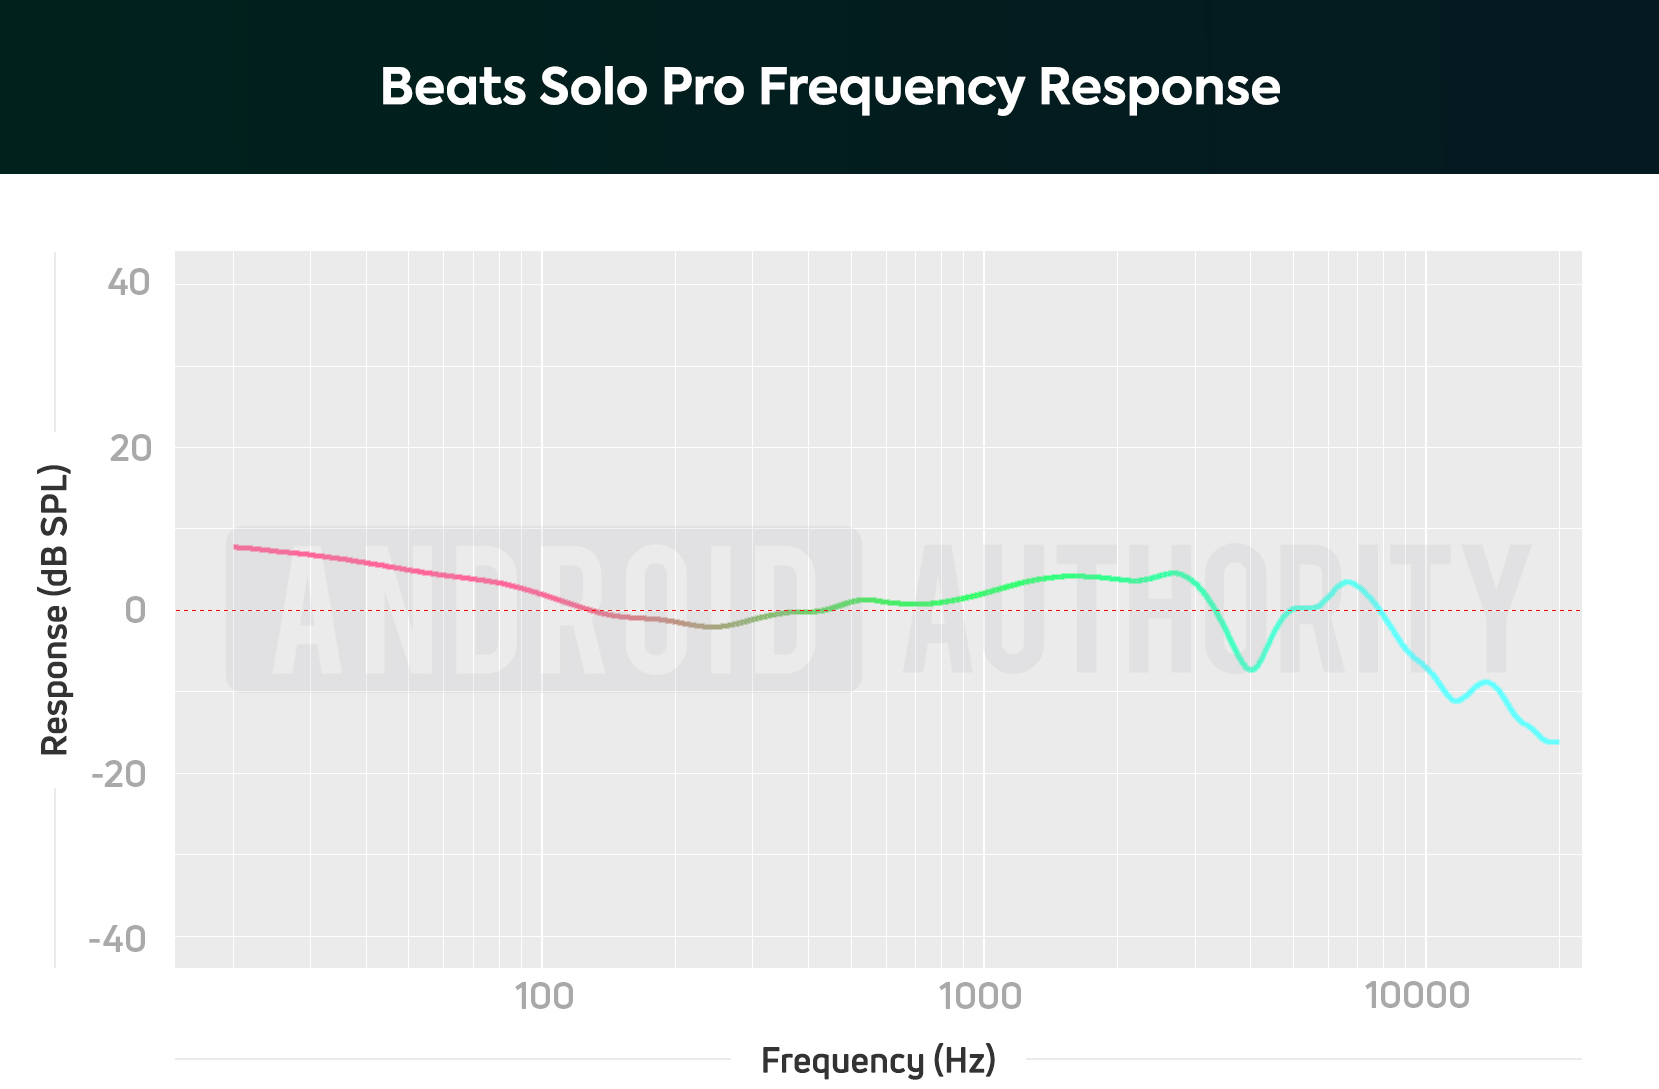 Beats Solo Pro AA frequency response